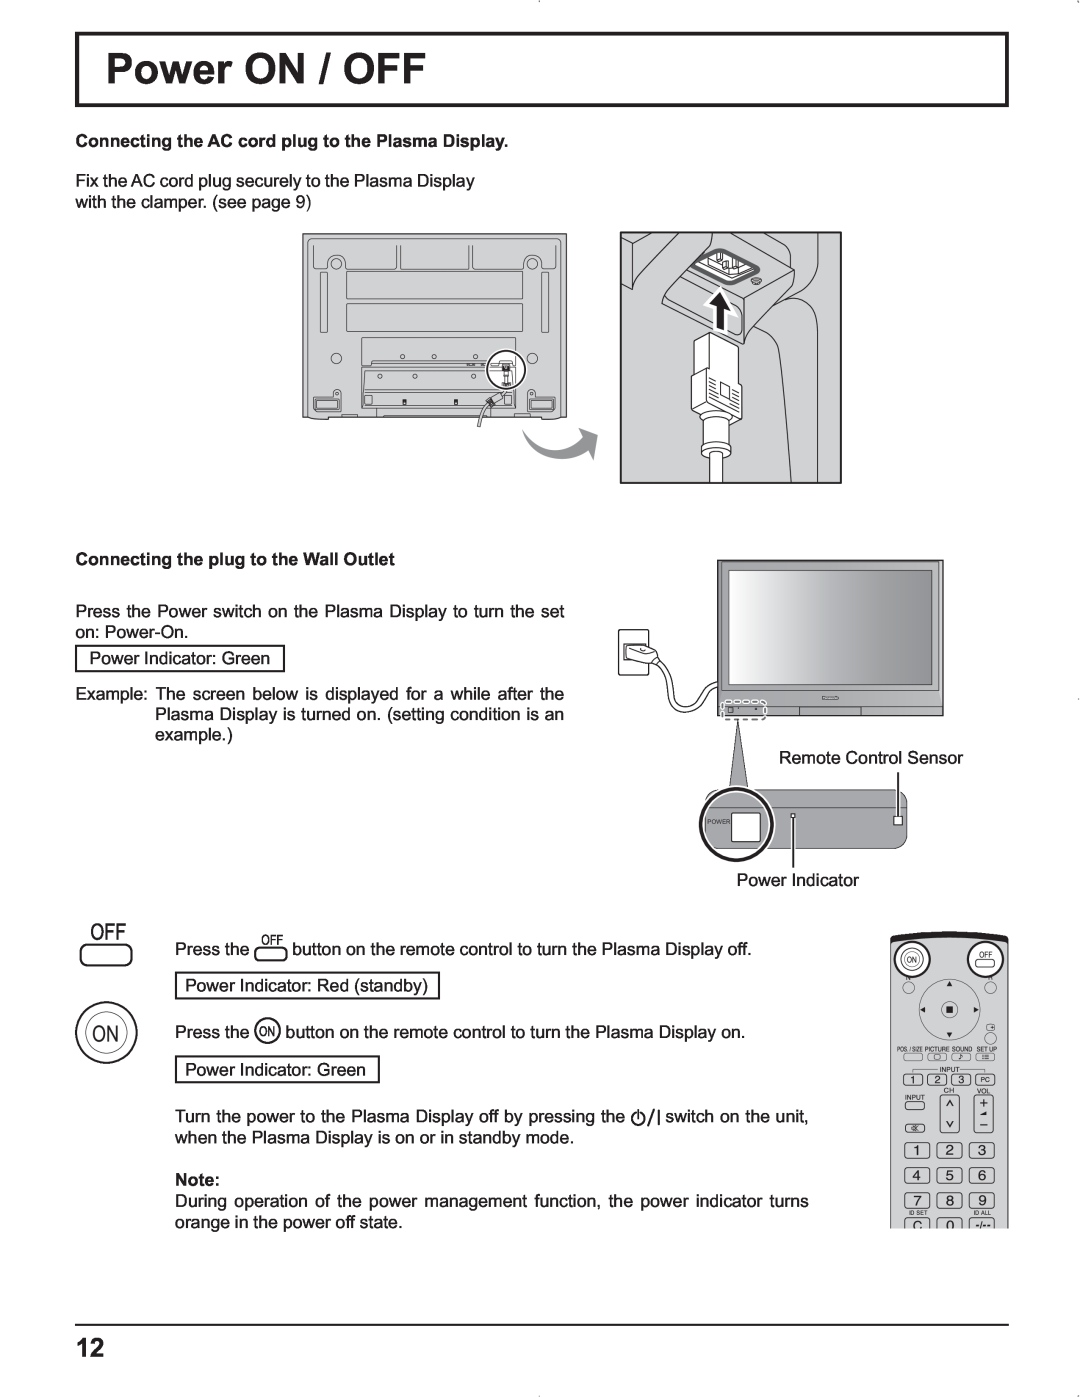 Panasonic TH-37PR9U, TH-37PG9U, TH-42PG9U, TH-42PR9U manual Power ON / OFF, Connecting the AC cord plug to the Plasma Display 